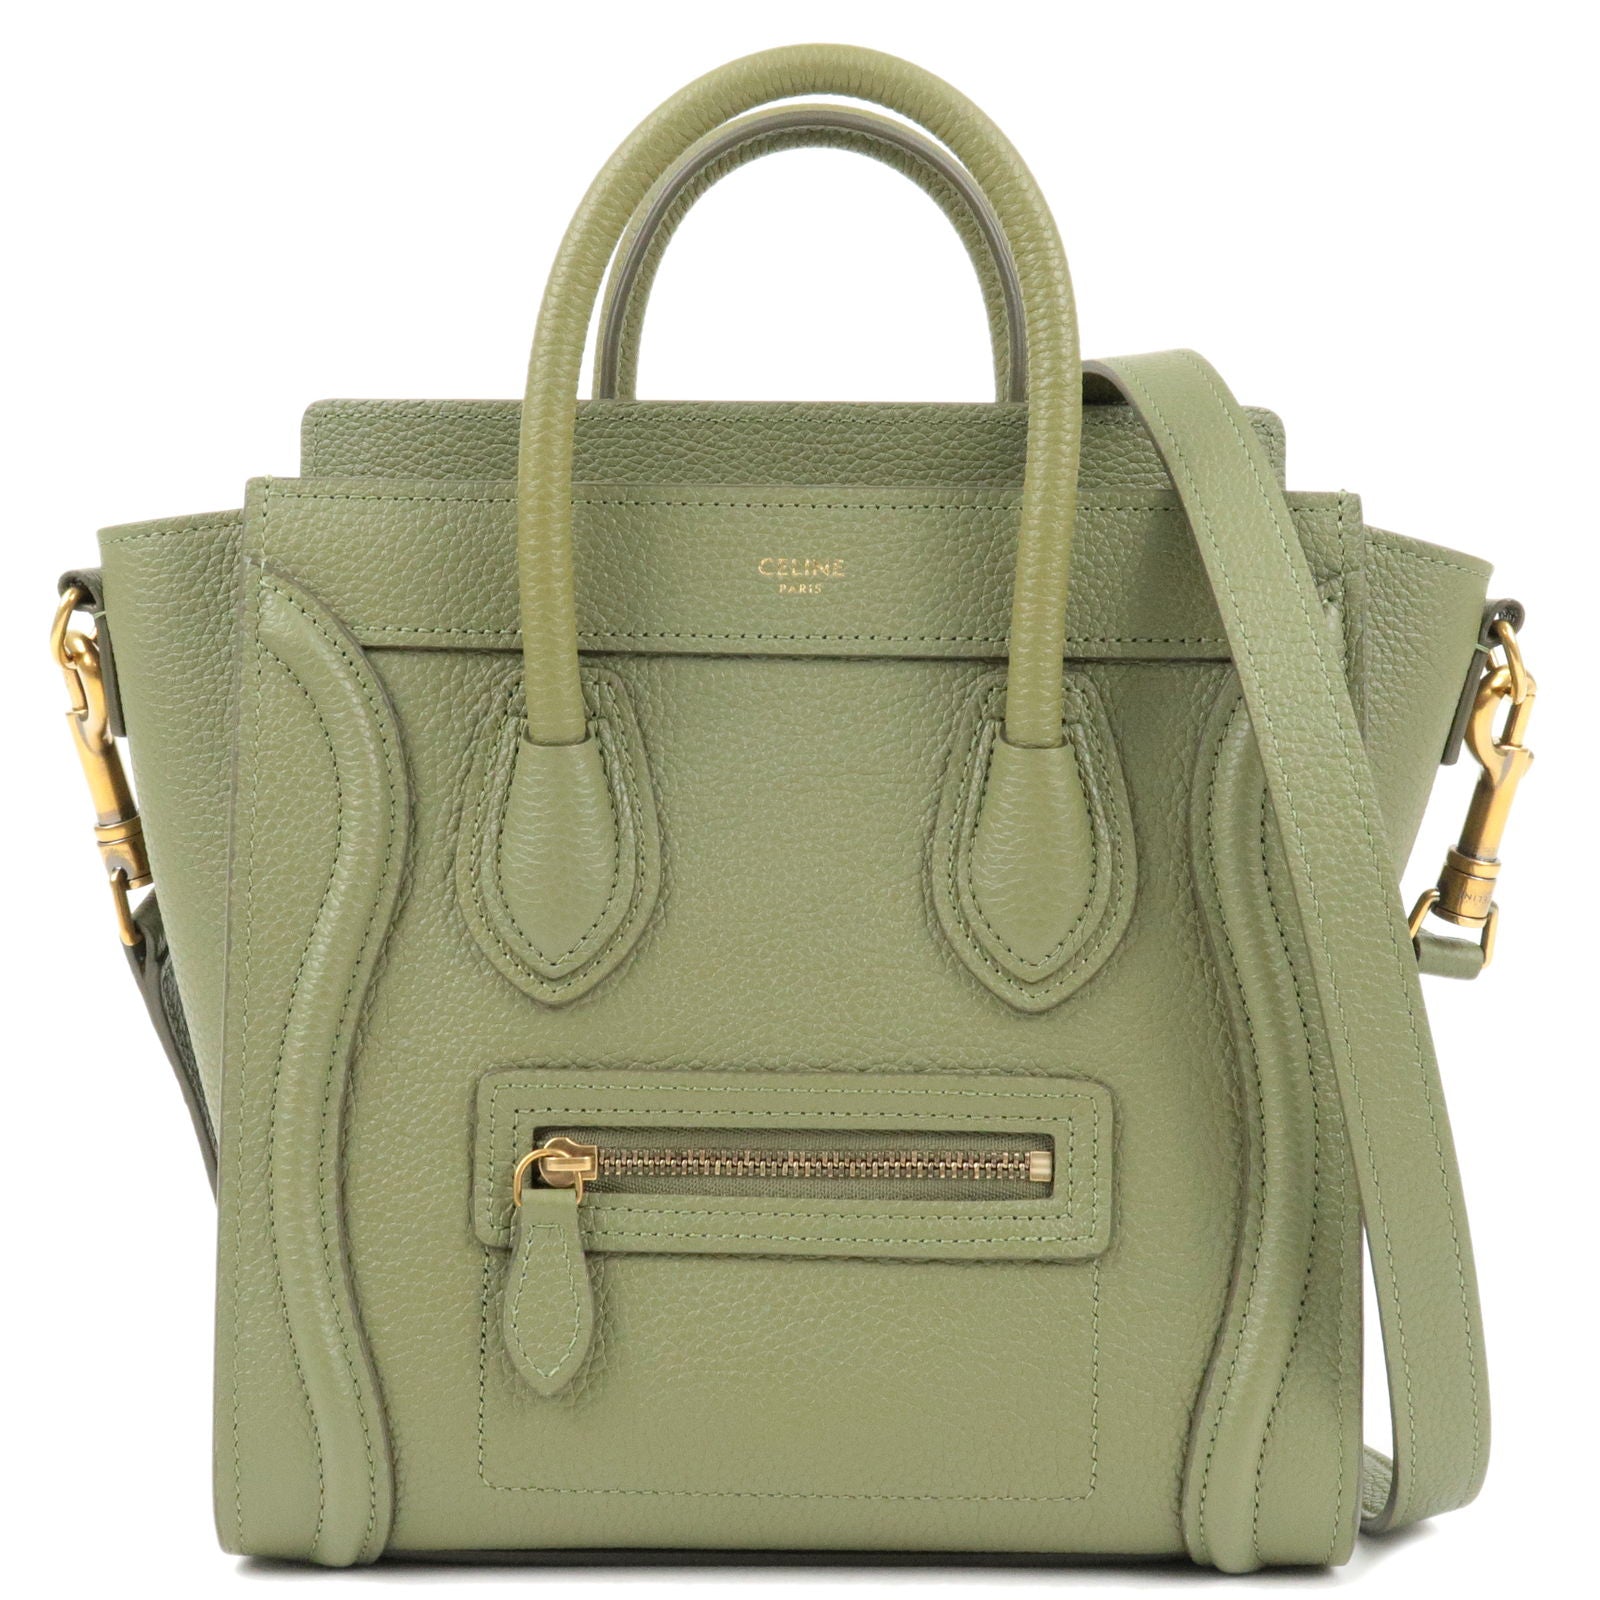 Celine Luggage - Pre-owned Women's Leather Handbag - Green - One Size